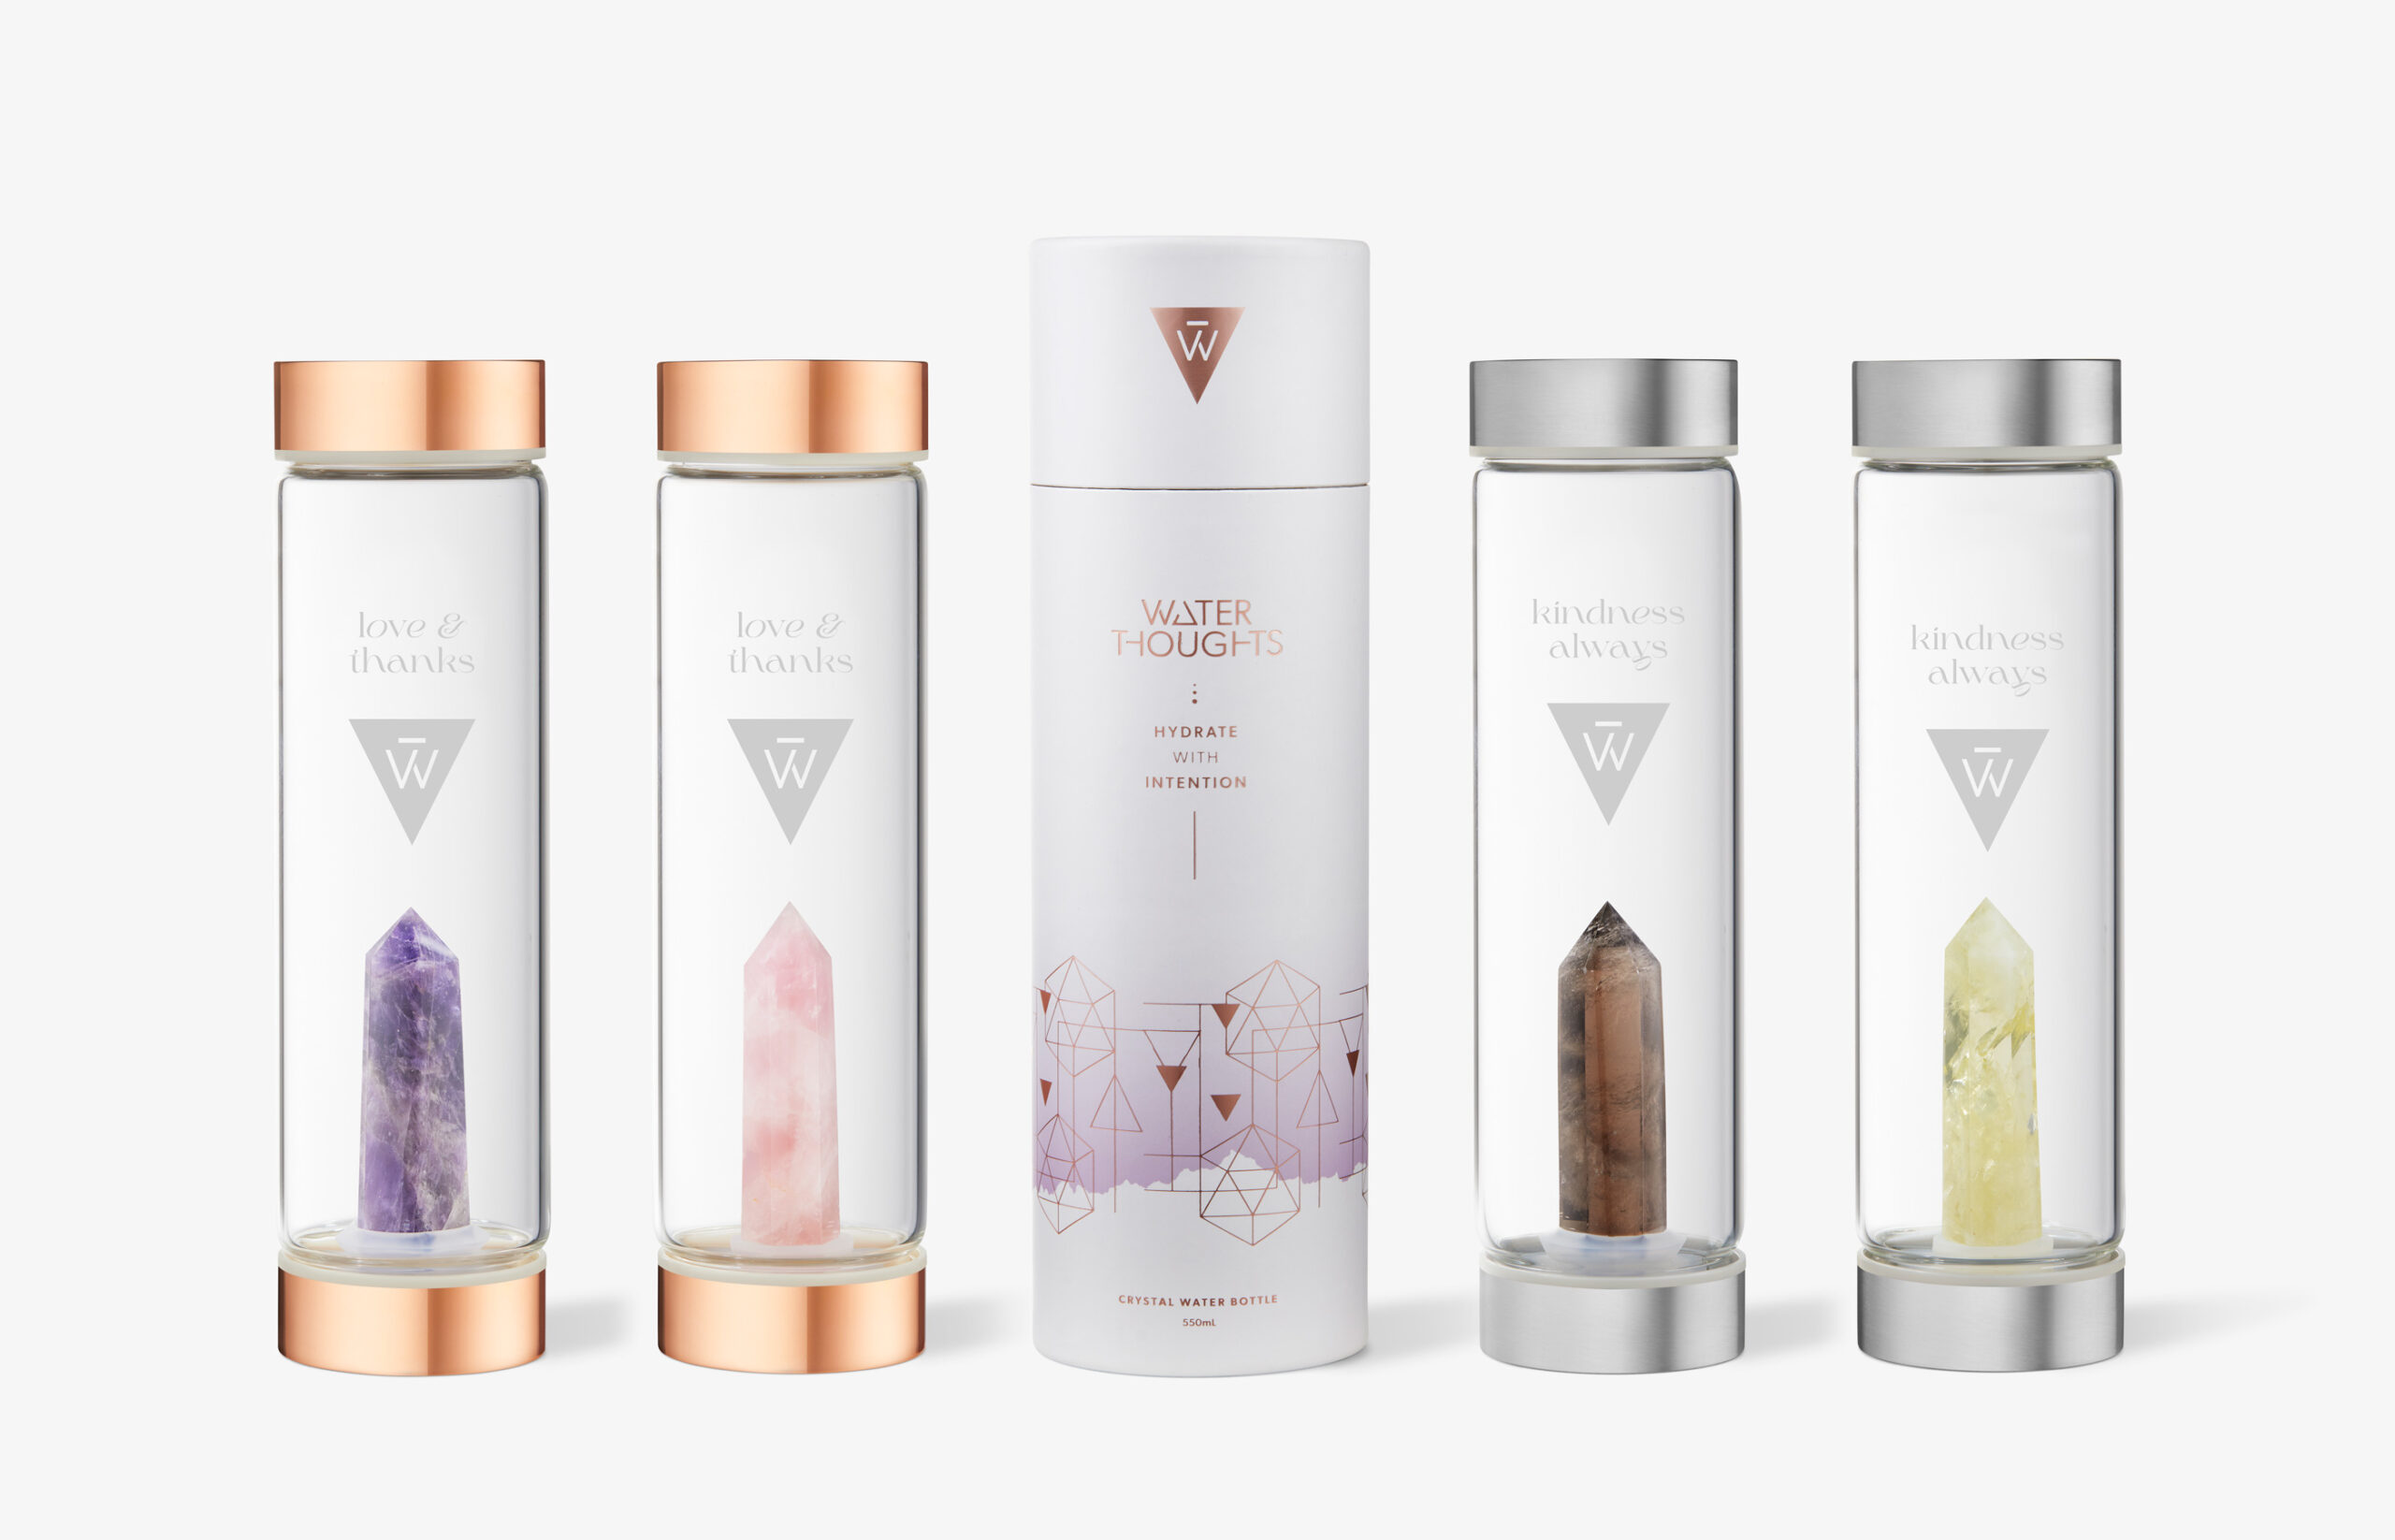 Water Thoughts Crystal Water Bottles Branding, Packaging & Website Design and Development by TL Design Co.